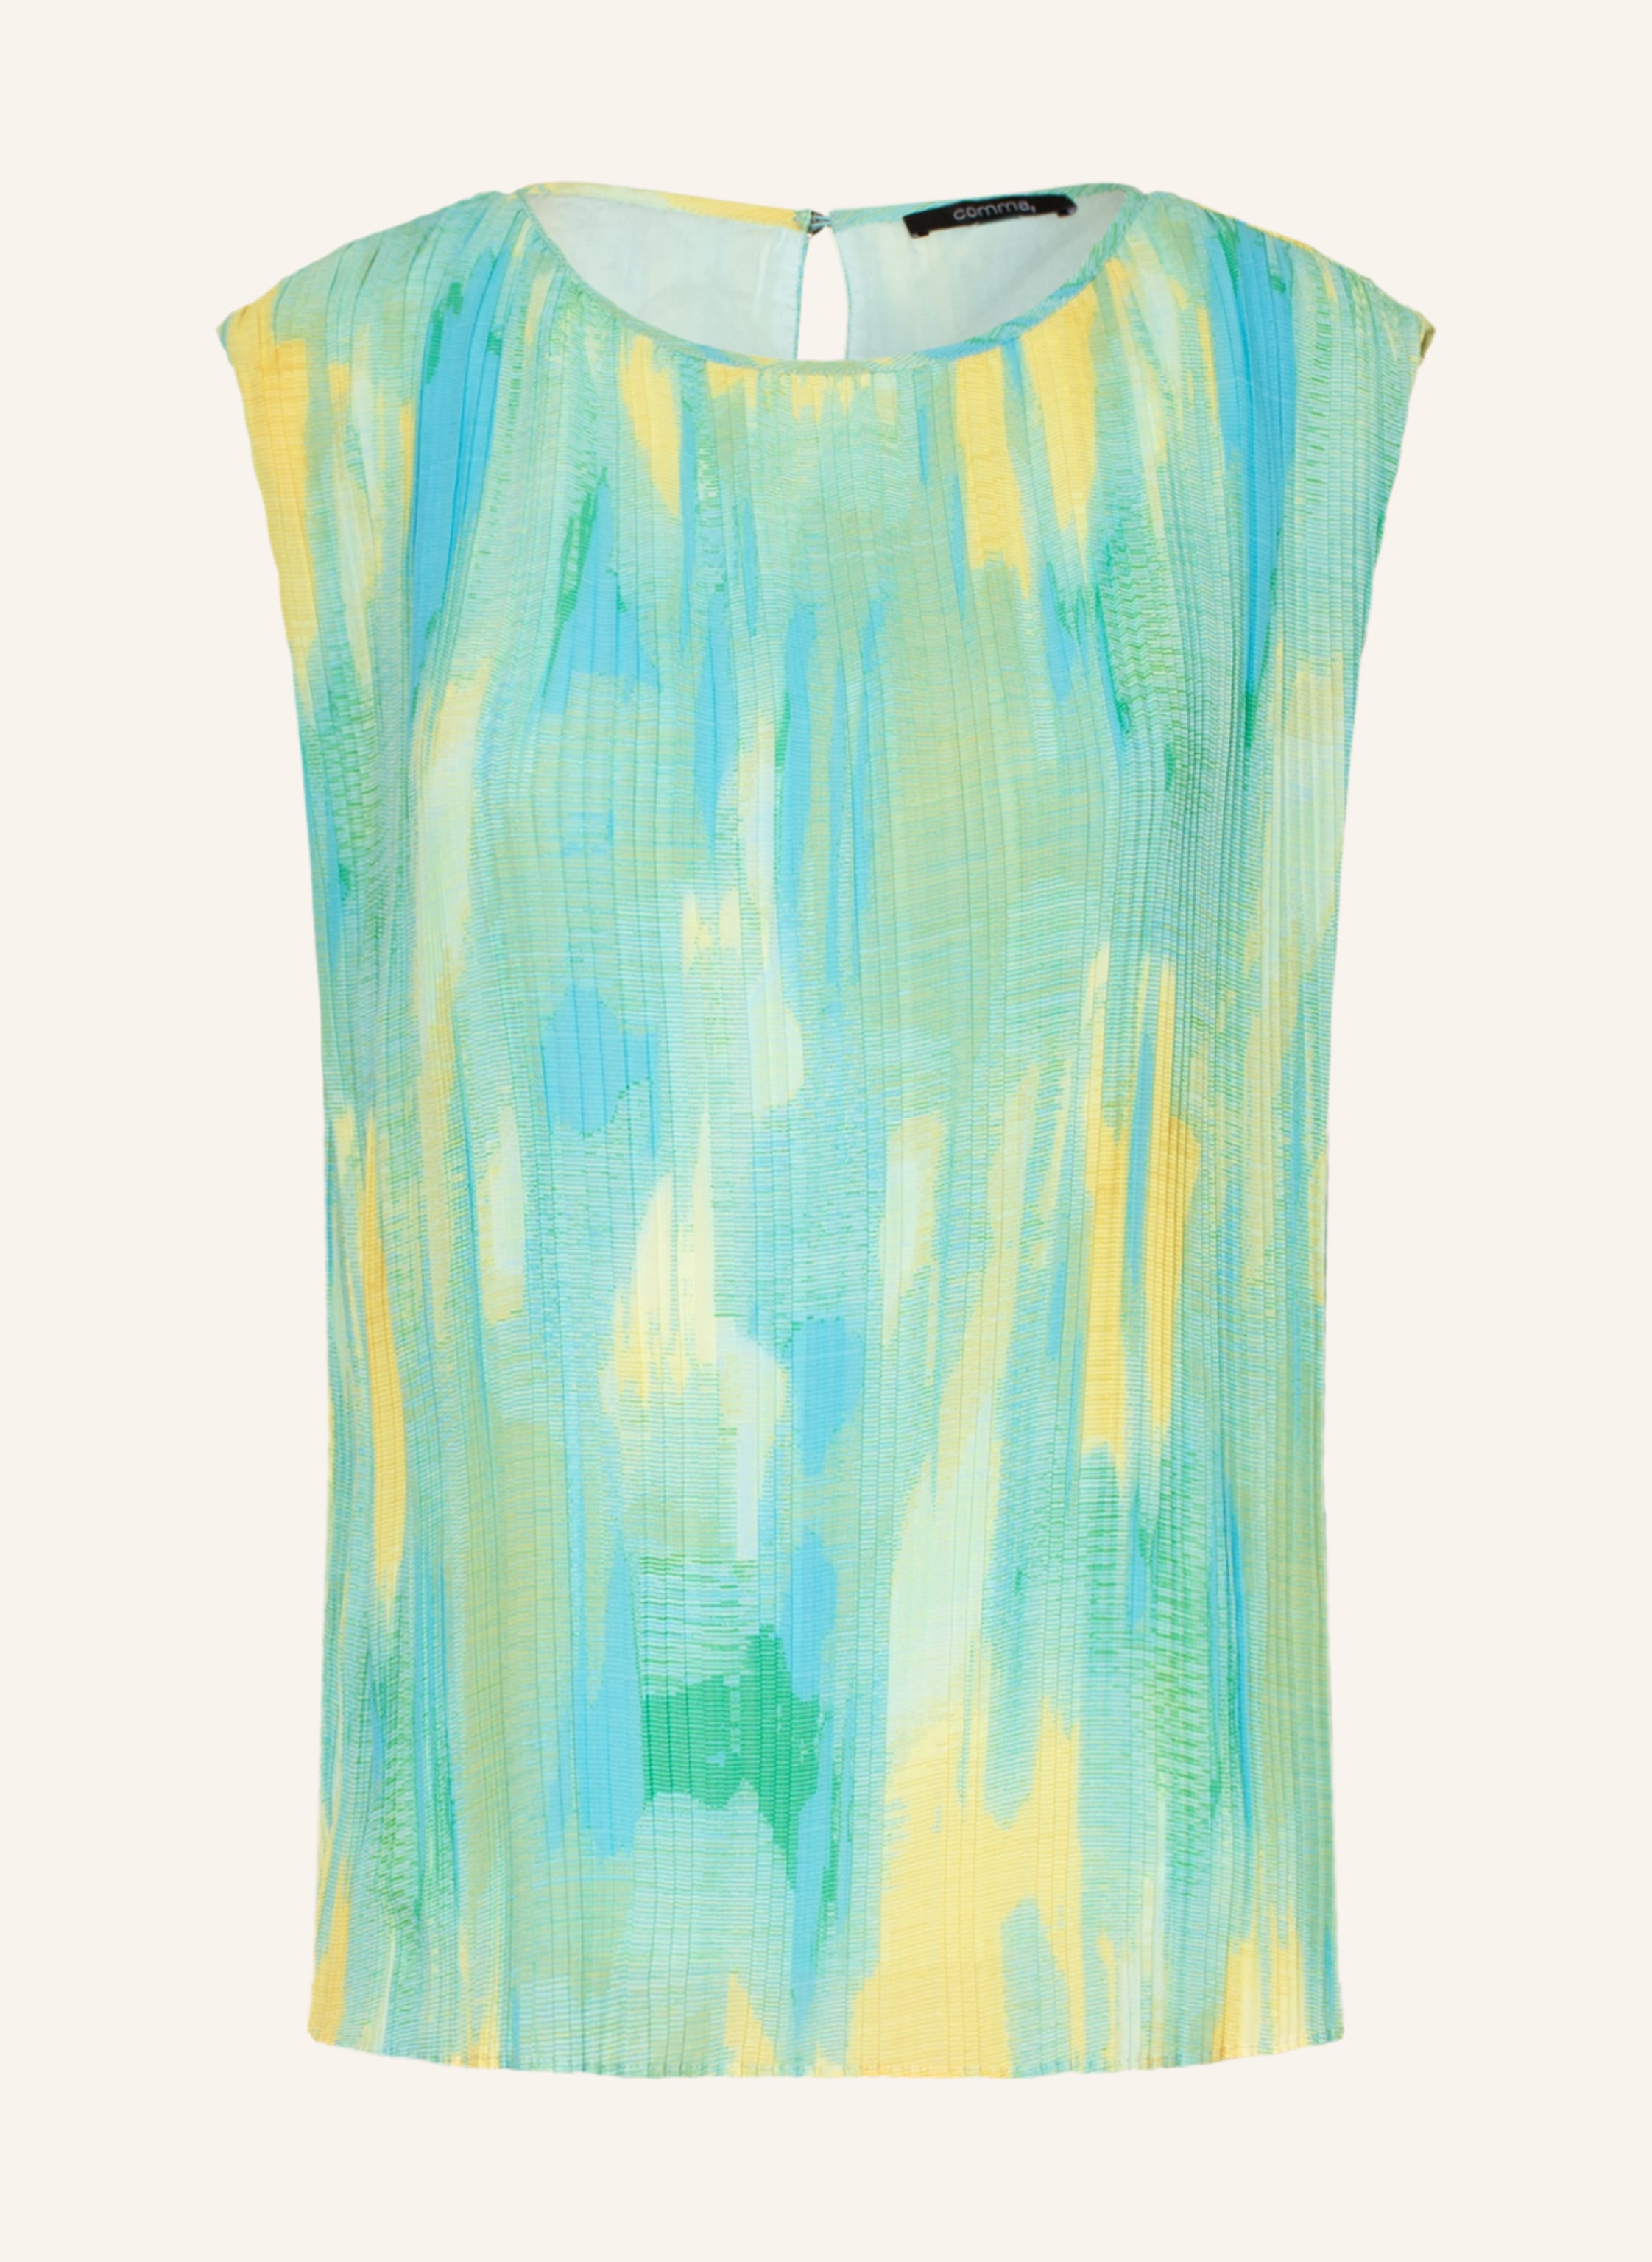 Pleated comma in top yellow light turquoise/ green/